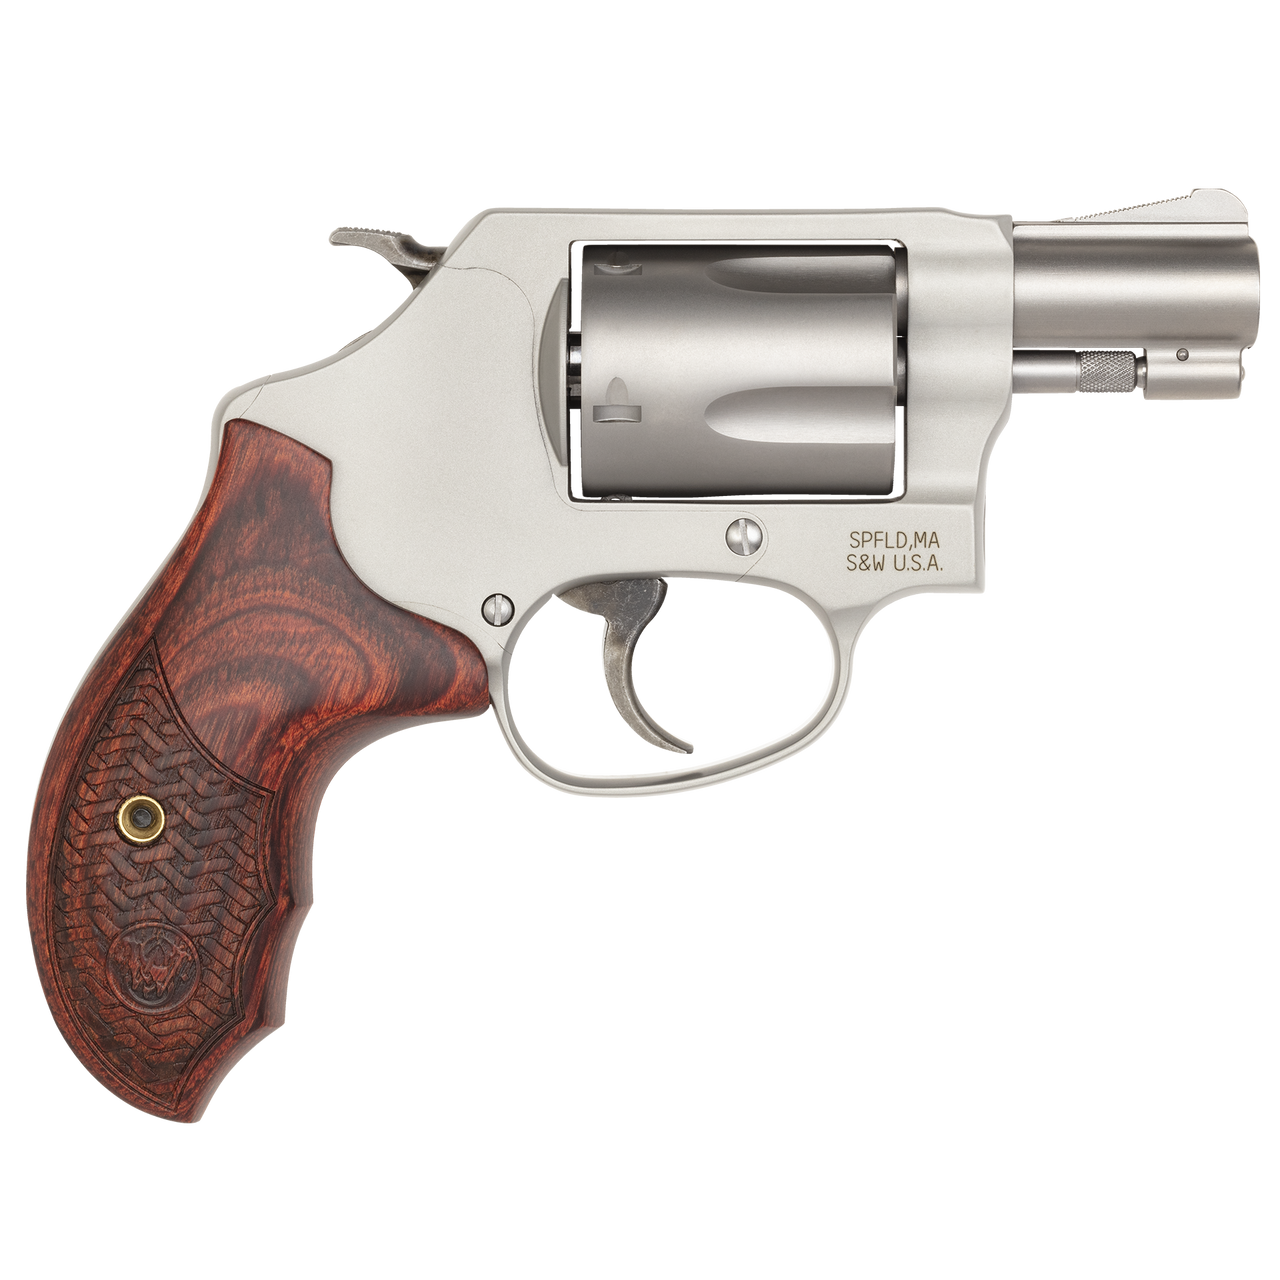 Buy Smith & Wesson Performance Center Model 637 Enhanced Action Revolver Online